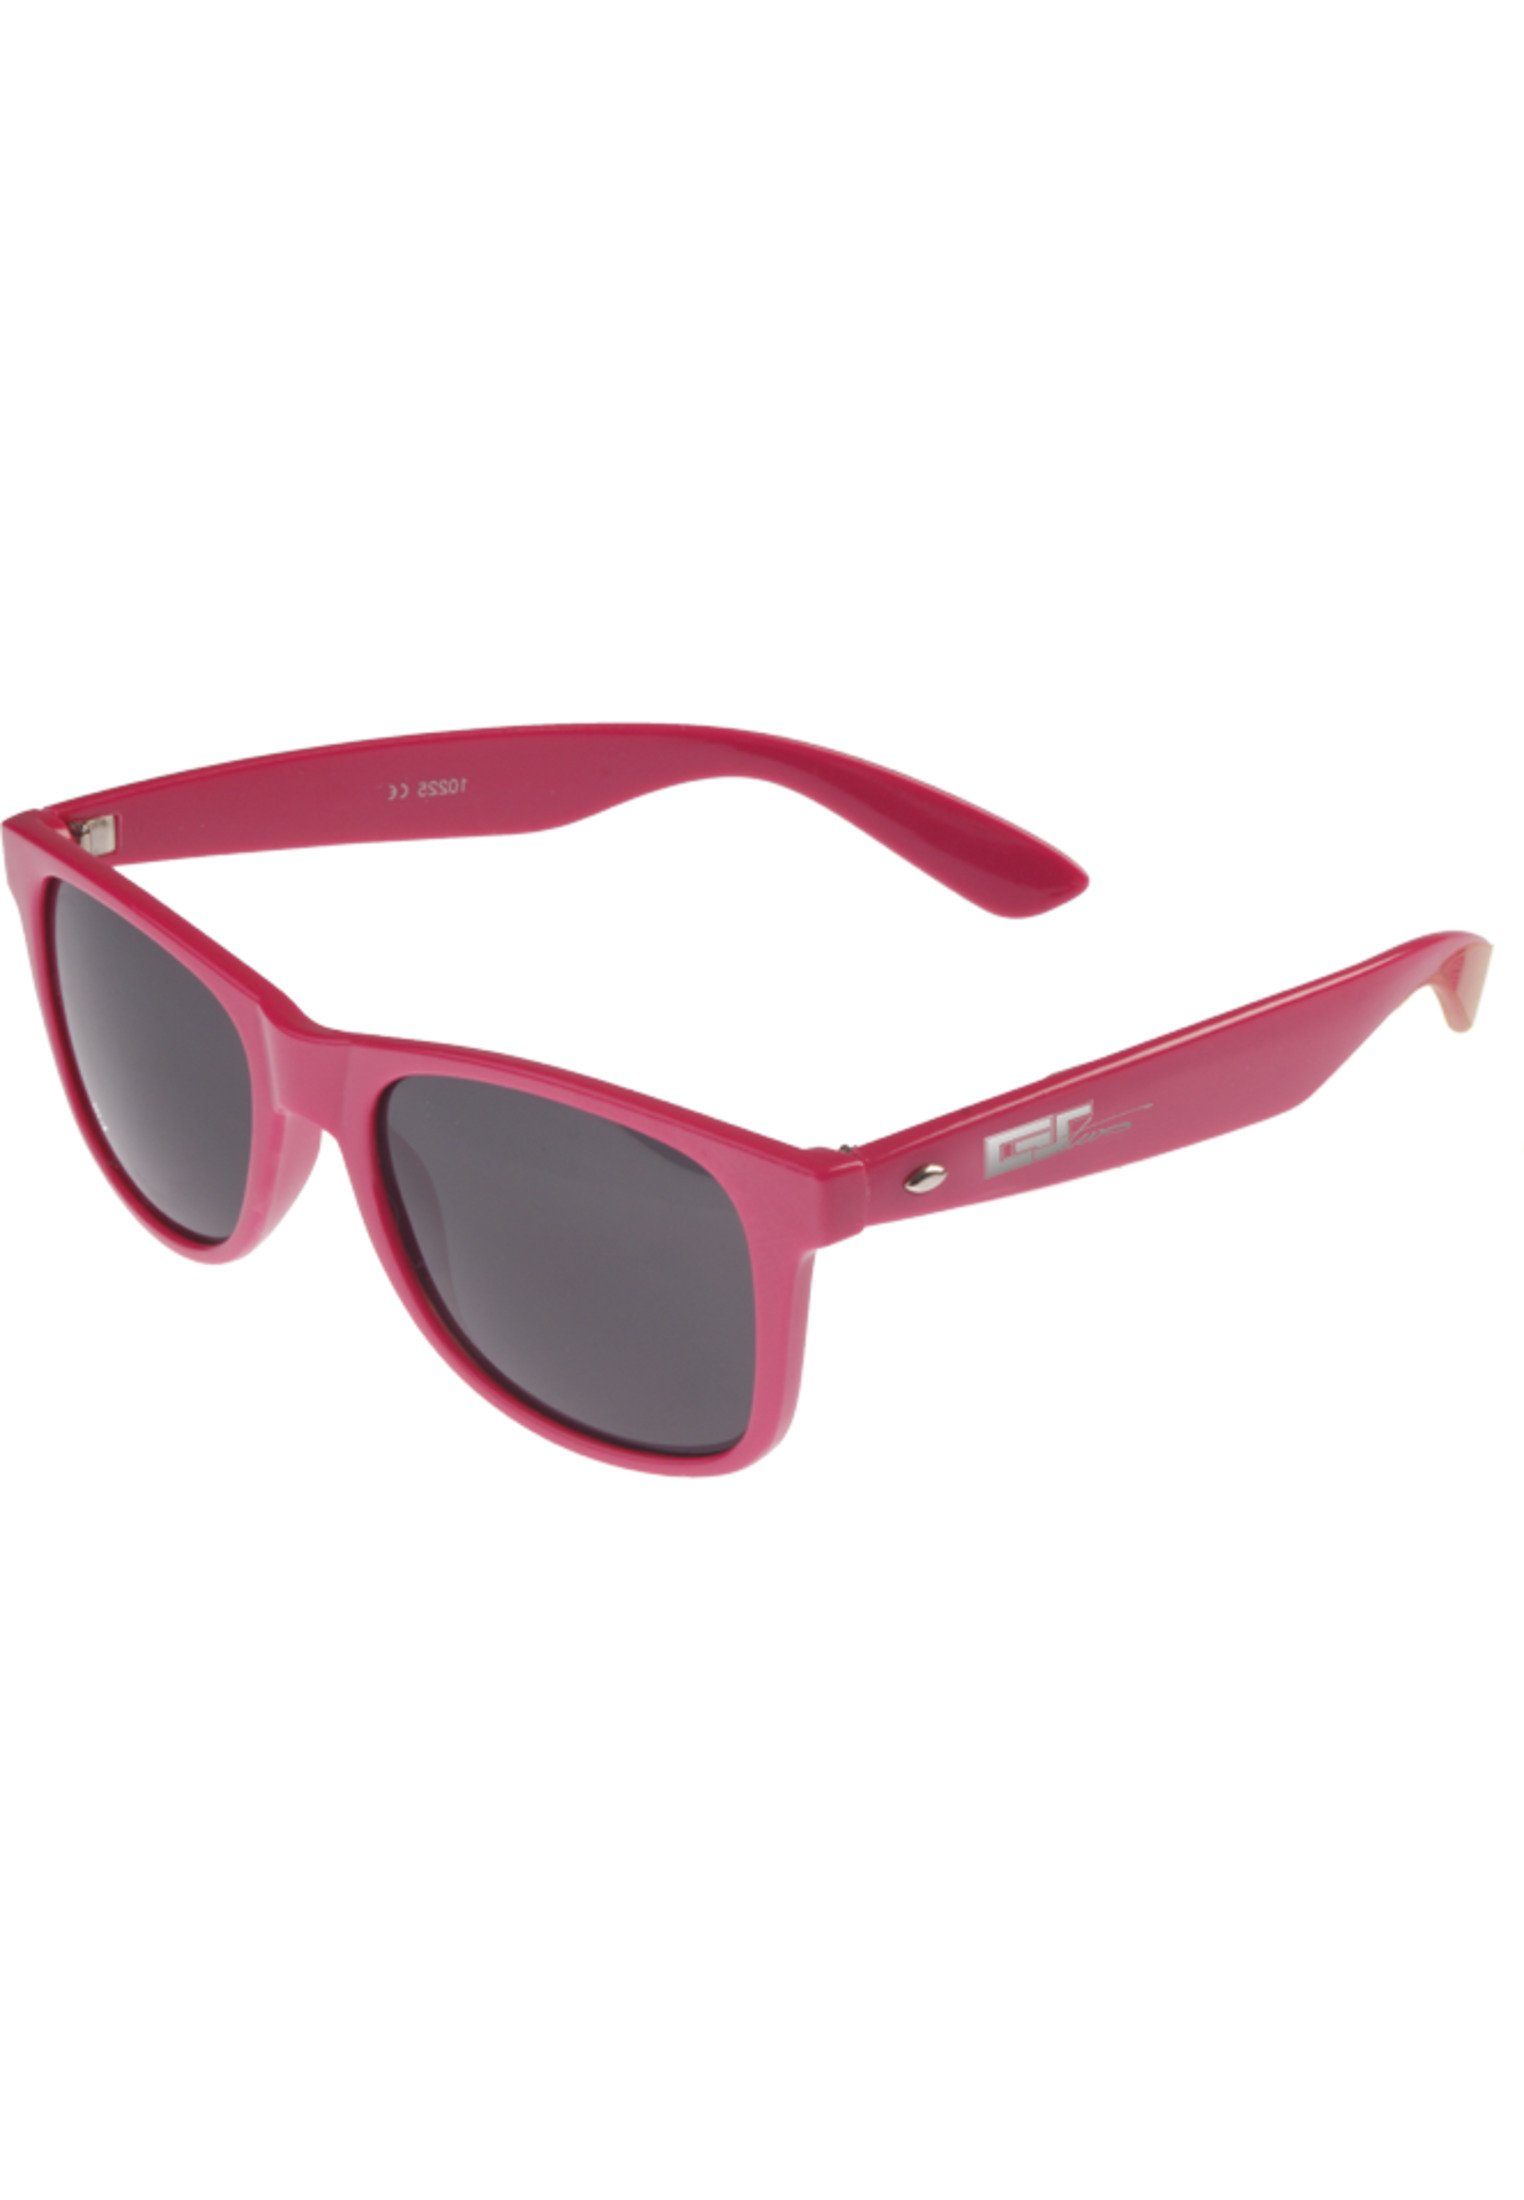 MSTRDS Sonnenbrille Accessoires Groove Shades GStwo magenta